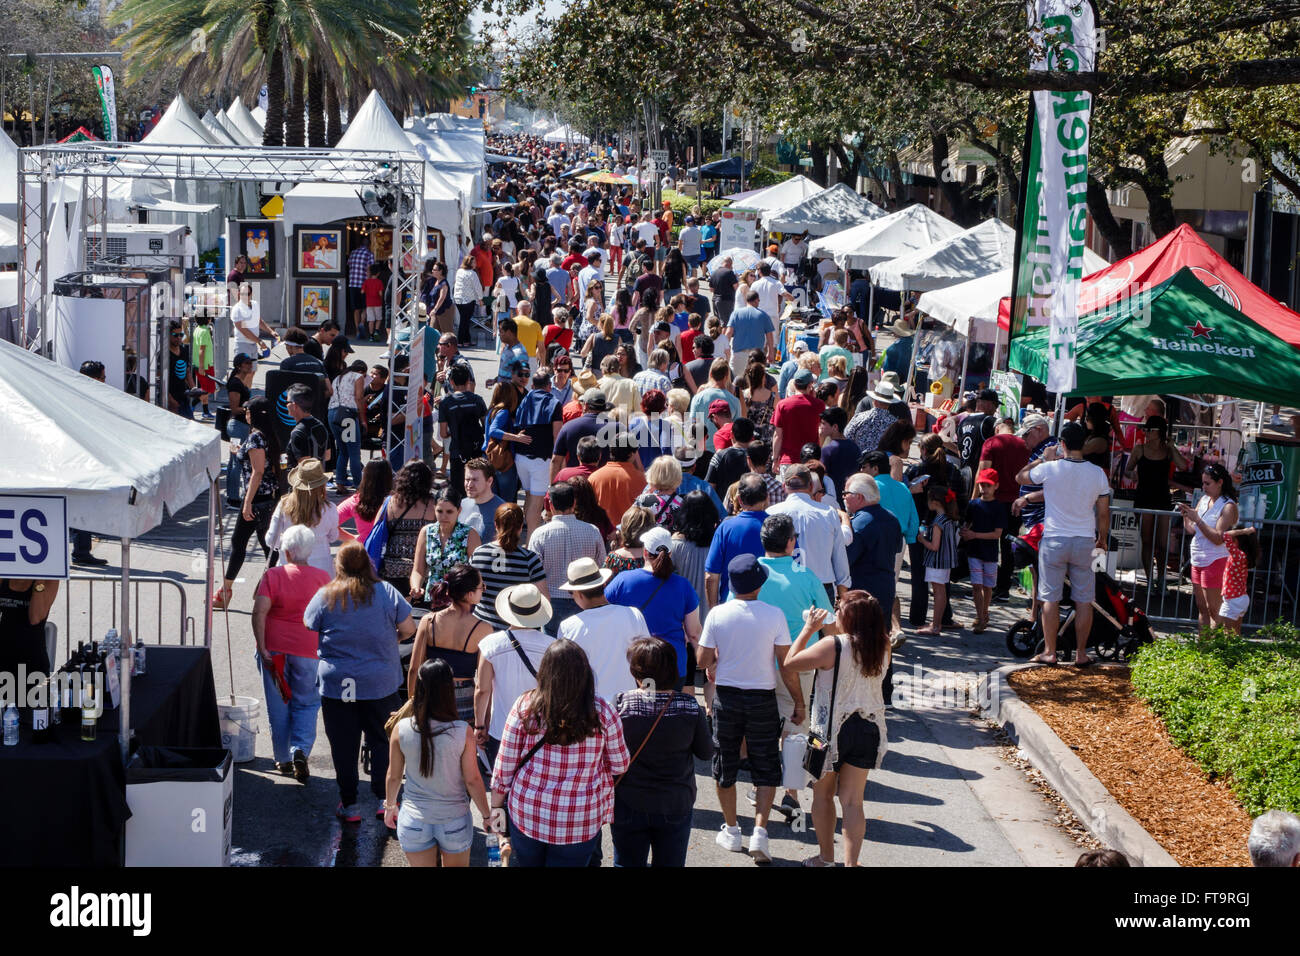 Miami Florida,Coral Gables,Carnaval Carnival Miracle Mile,street festival,annual celebration,Hispanic crowd,families,vendors,booths,stalls,FL160306022 Stock Photo